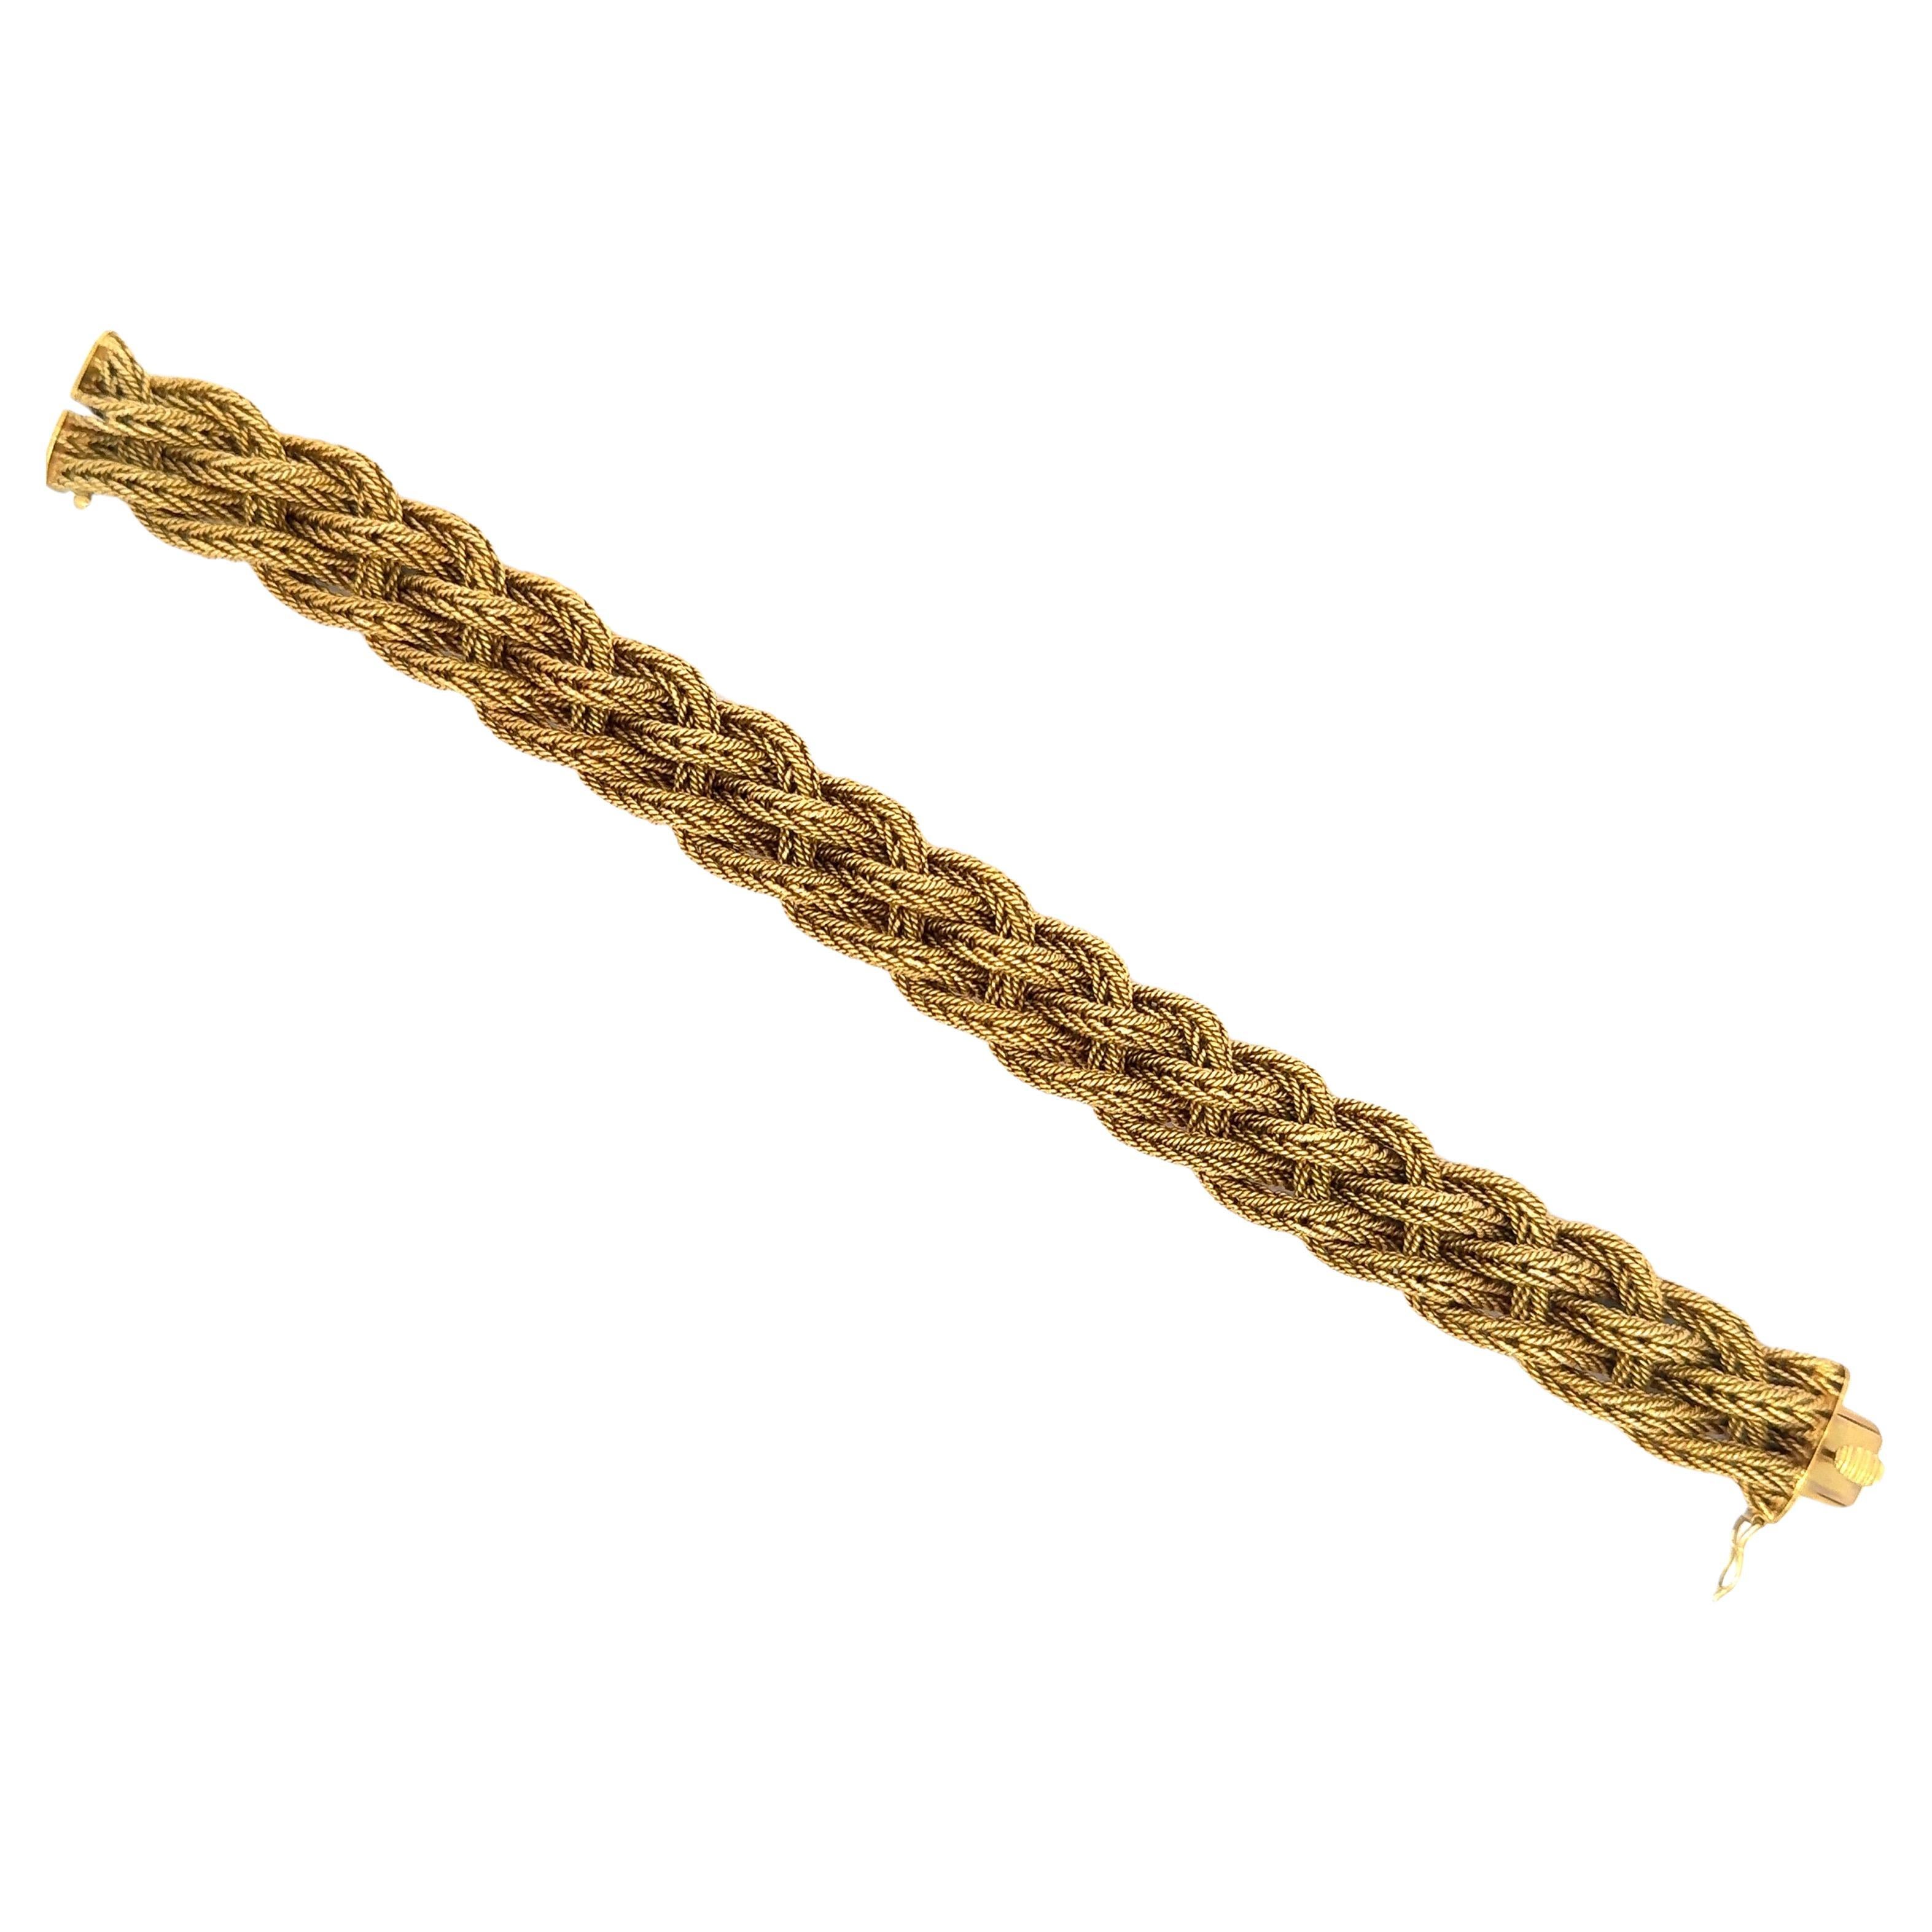 18 Karat yellow gold bracelet featuring a woven braided motif weighing 77.7 grams.
Nice and heavy!

